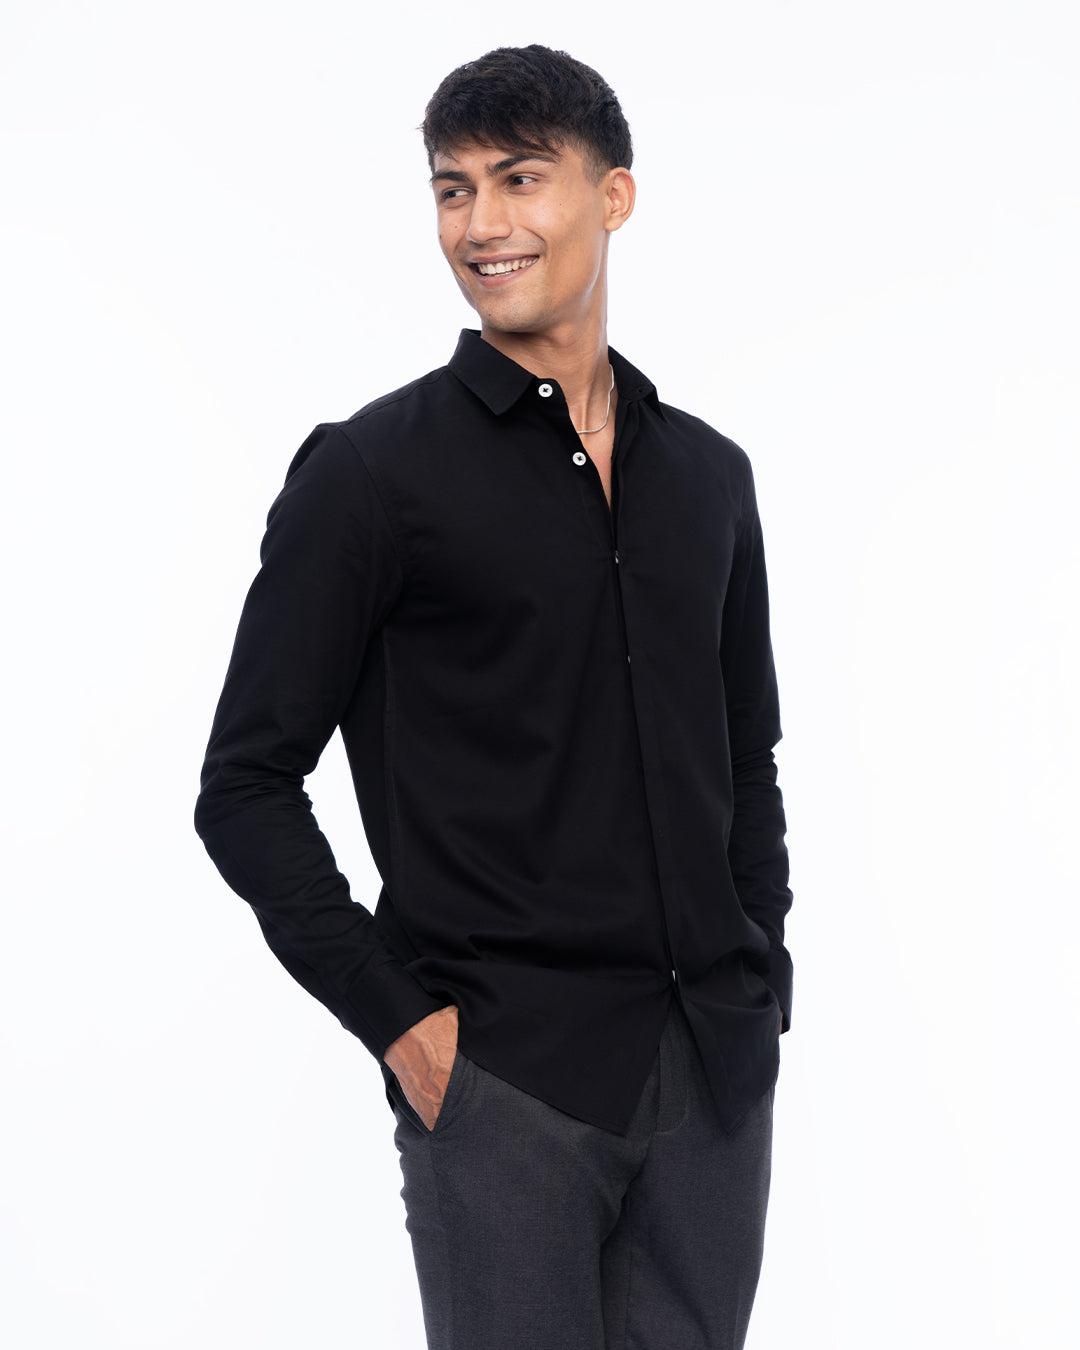 A person with short dark hair wearing an Obsidian - Classic Shirt made from premium cotton and gray pants is smiling while standing with their right hand in their pocket against a plain white background.